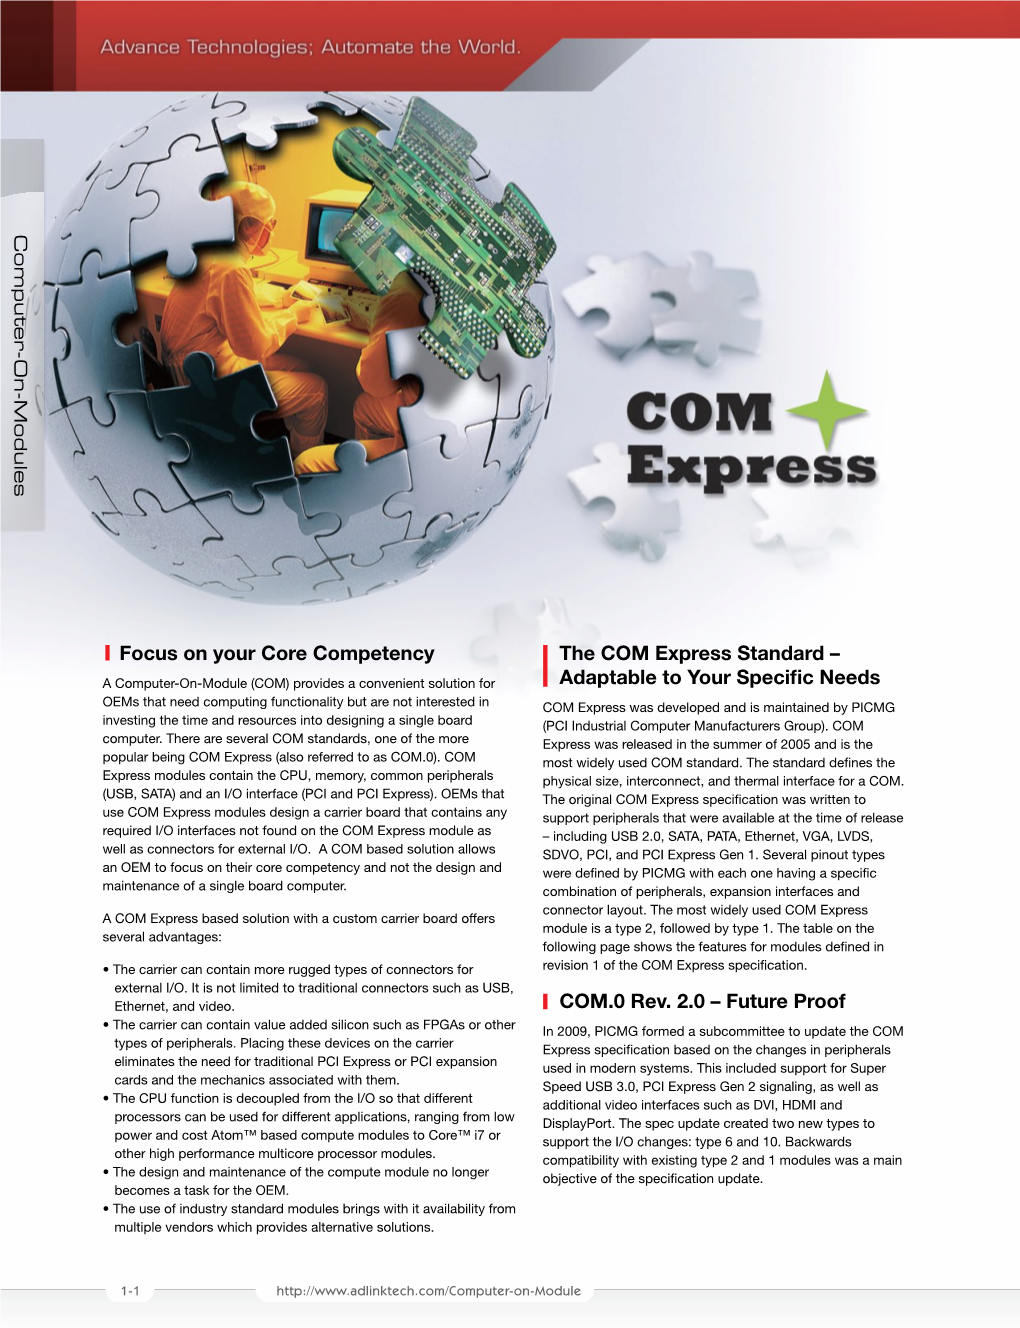 Focus on Your Core Competency the COM Express Standard